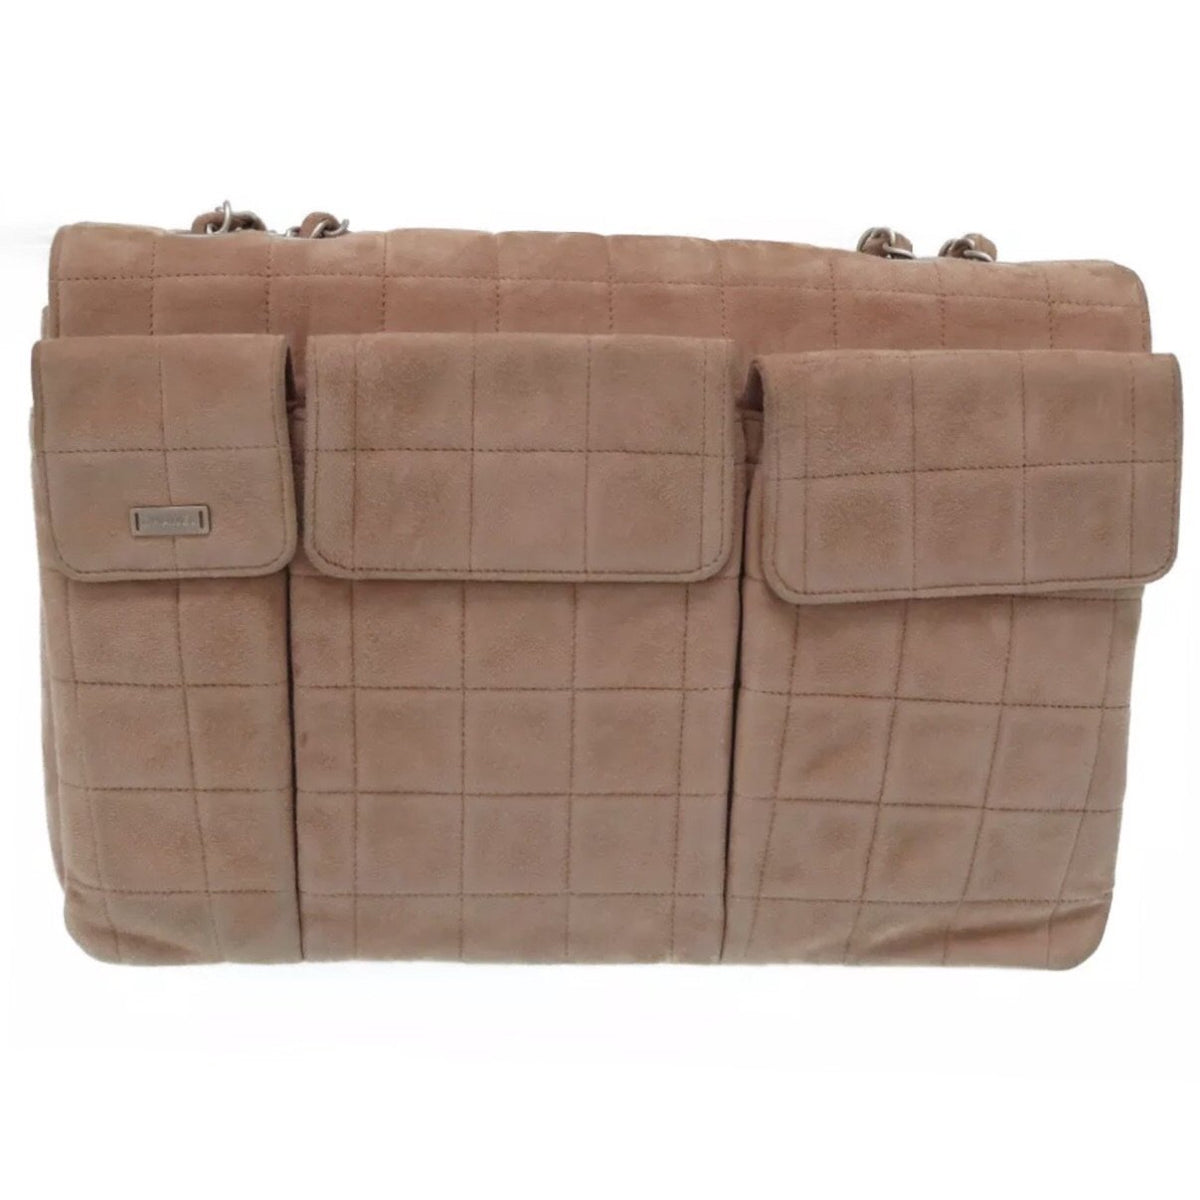 Chanel Quilted Chocolate Bar Multi-pocket Flap Bag